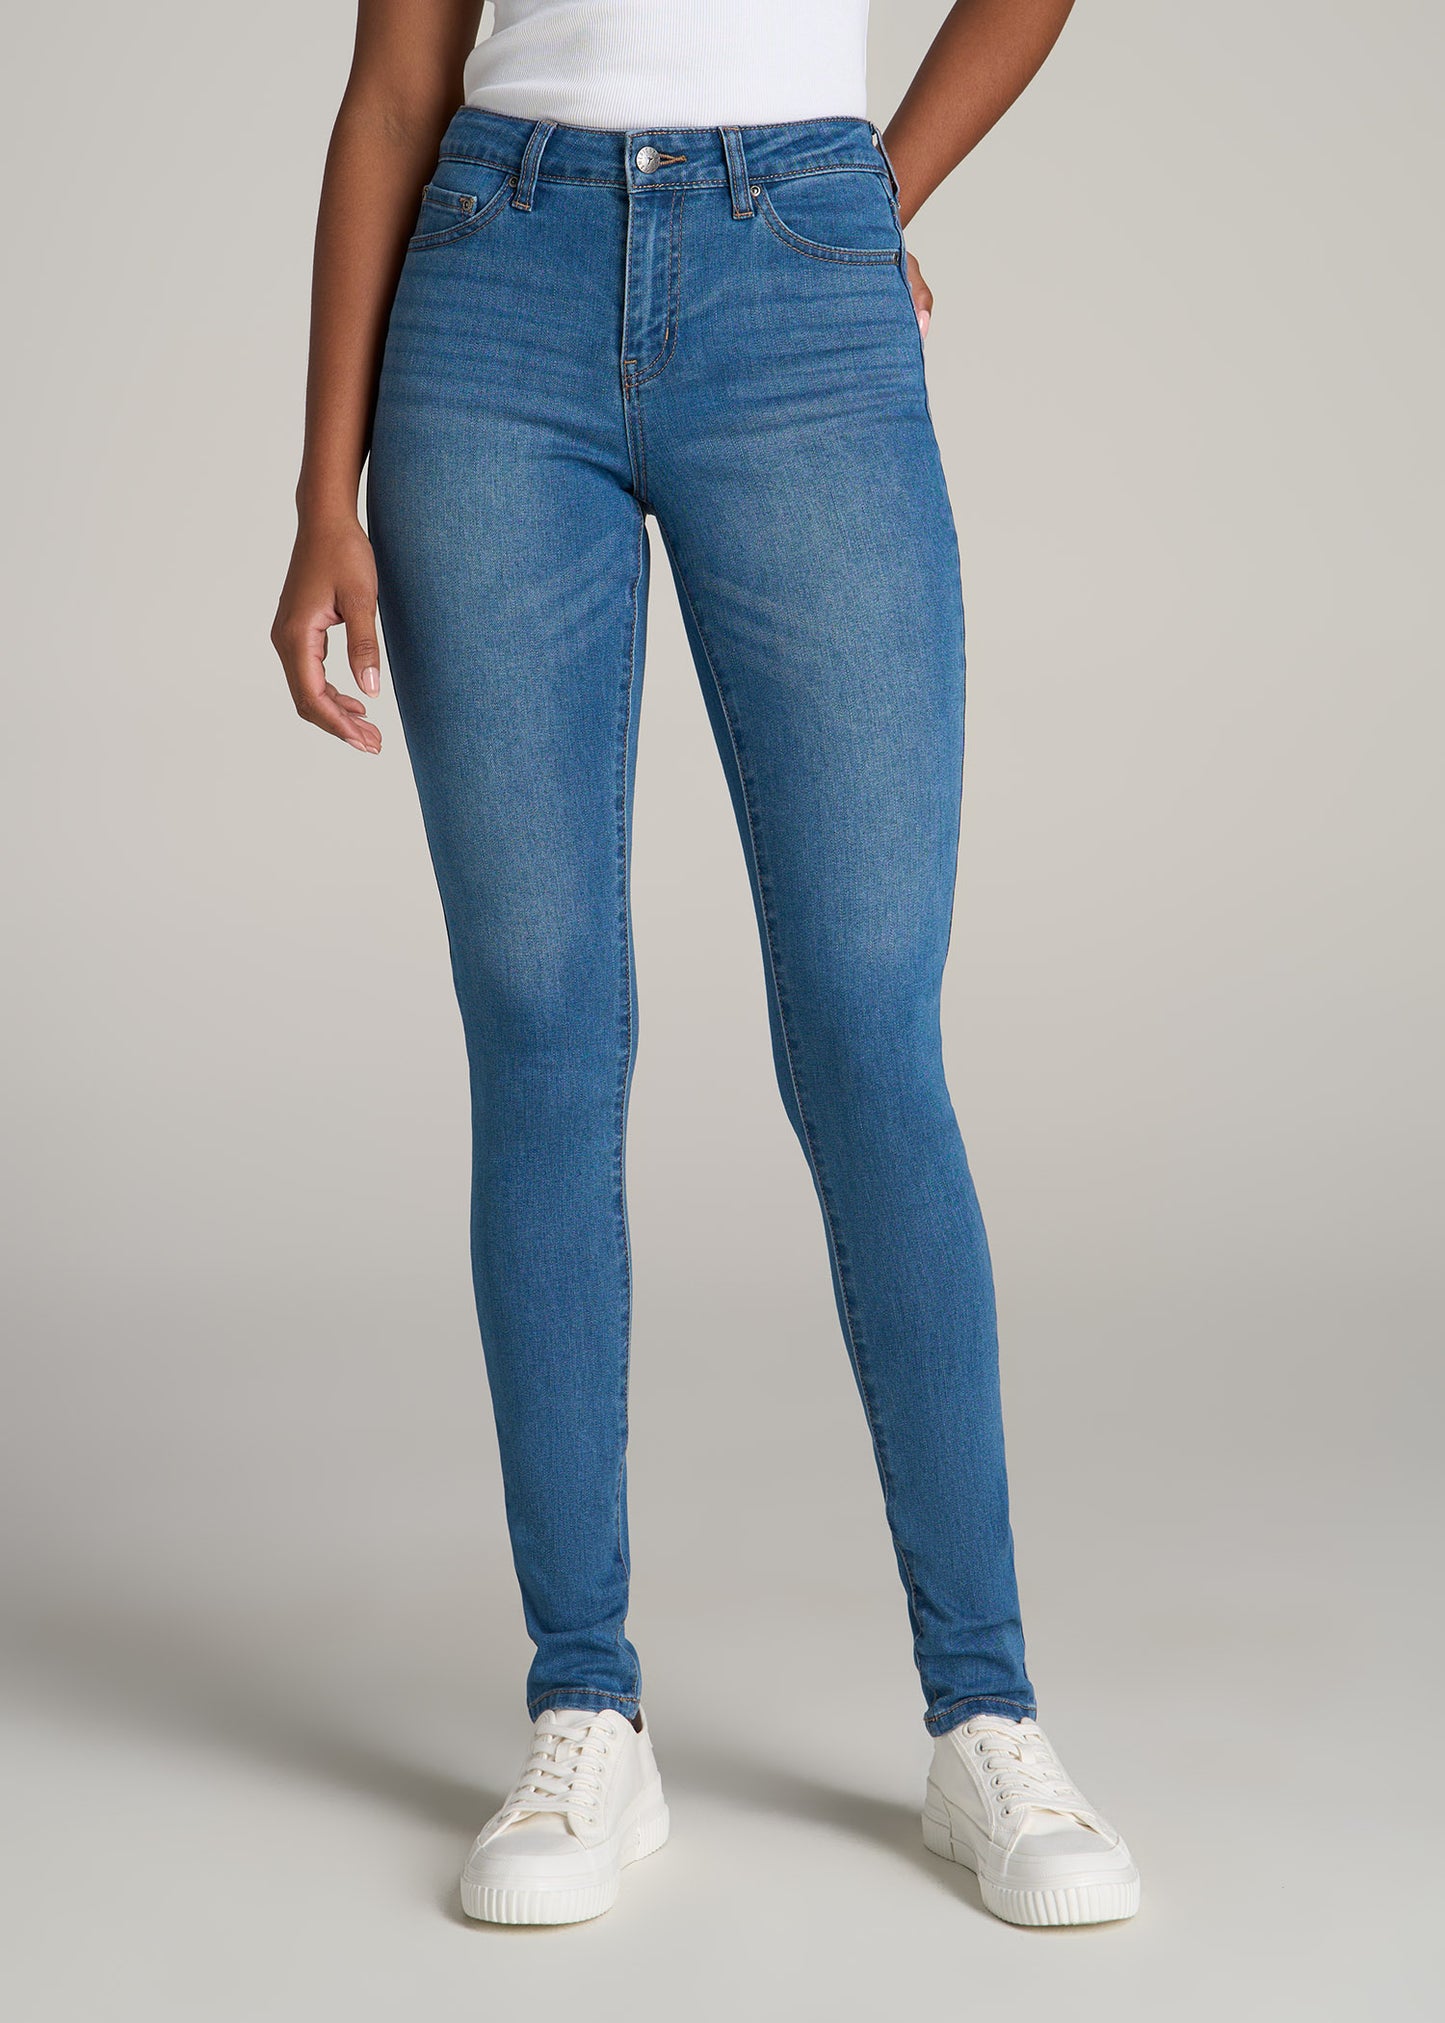 A tall woman wearing American Tall's Sarah Mid-Rise Skinny Jean in Bright Mid Blue.